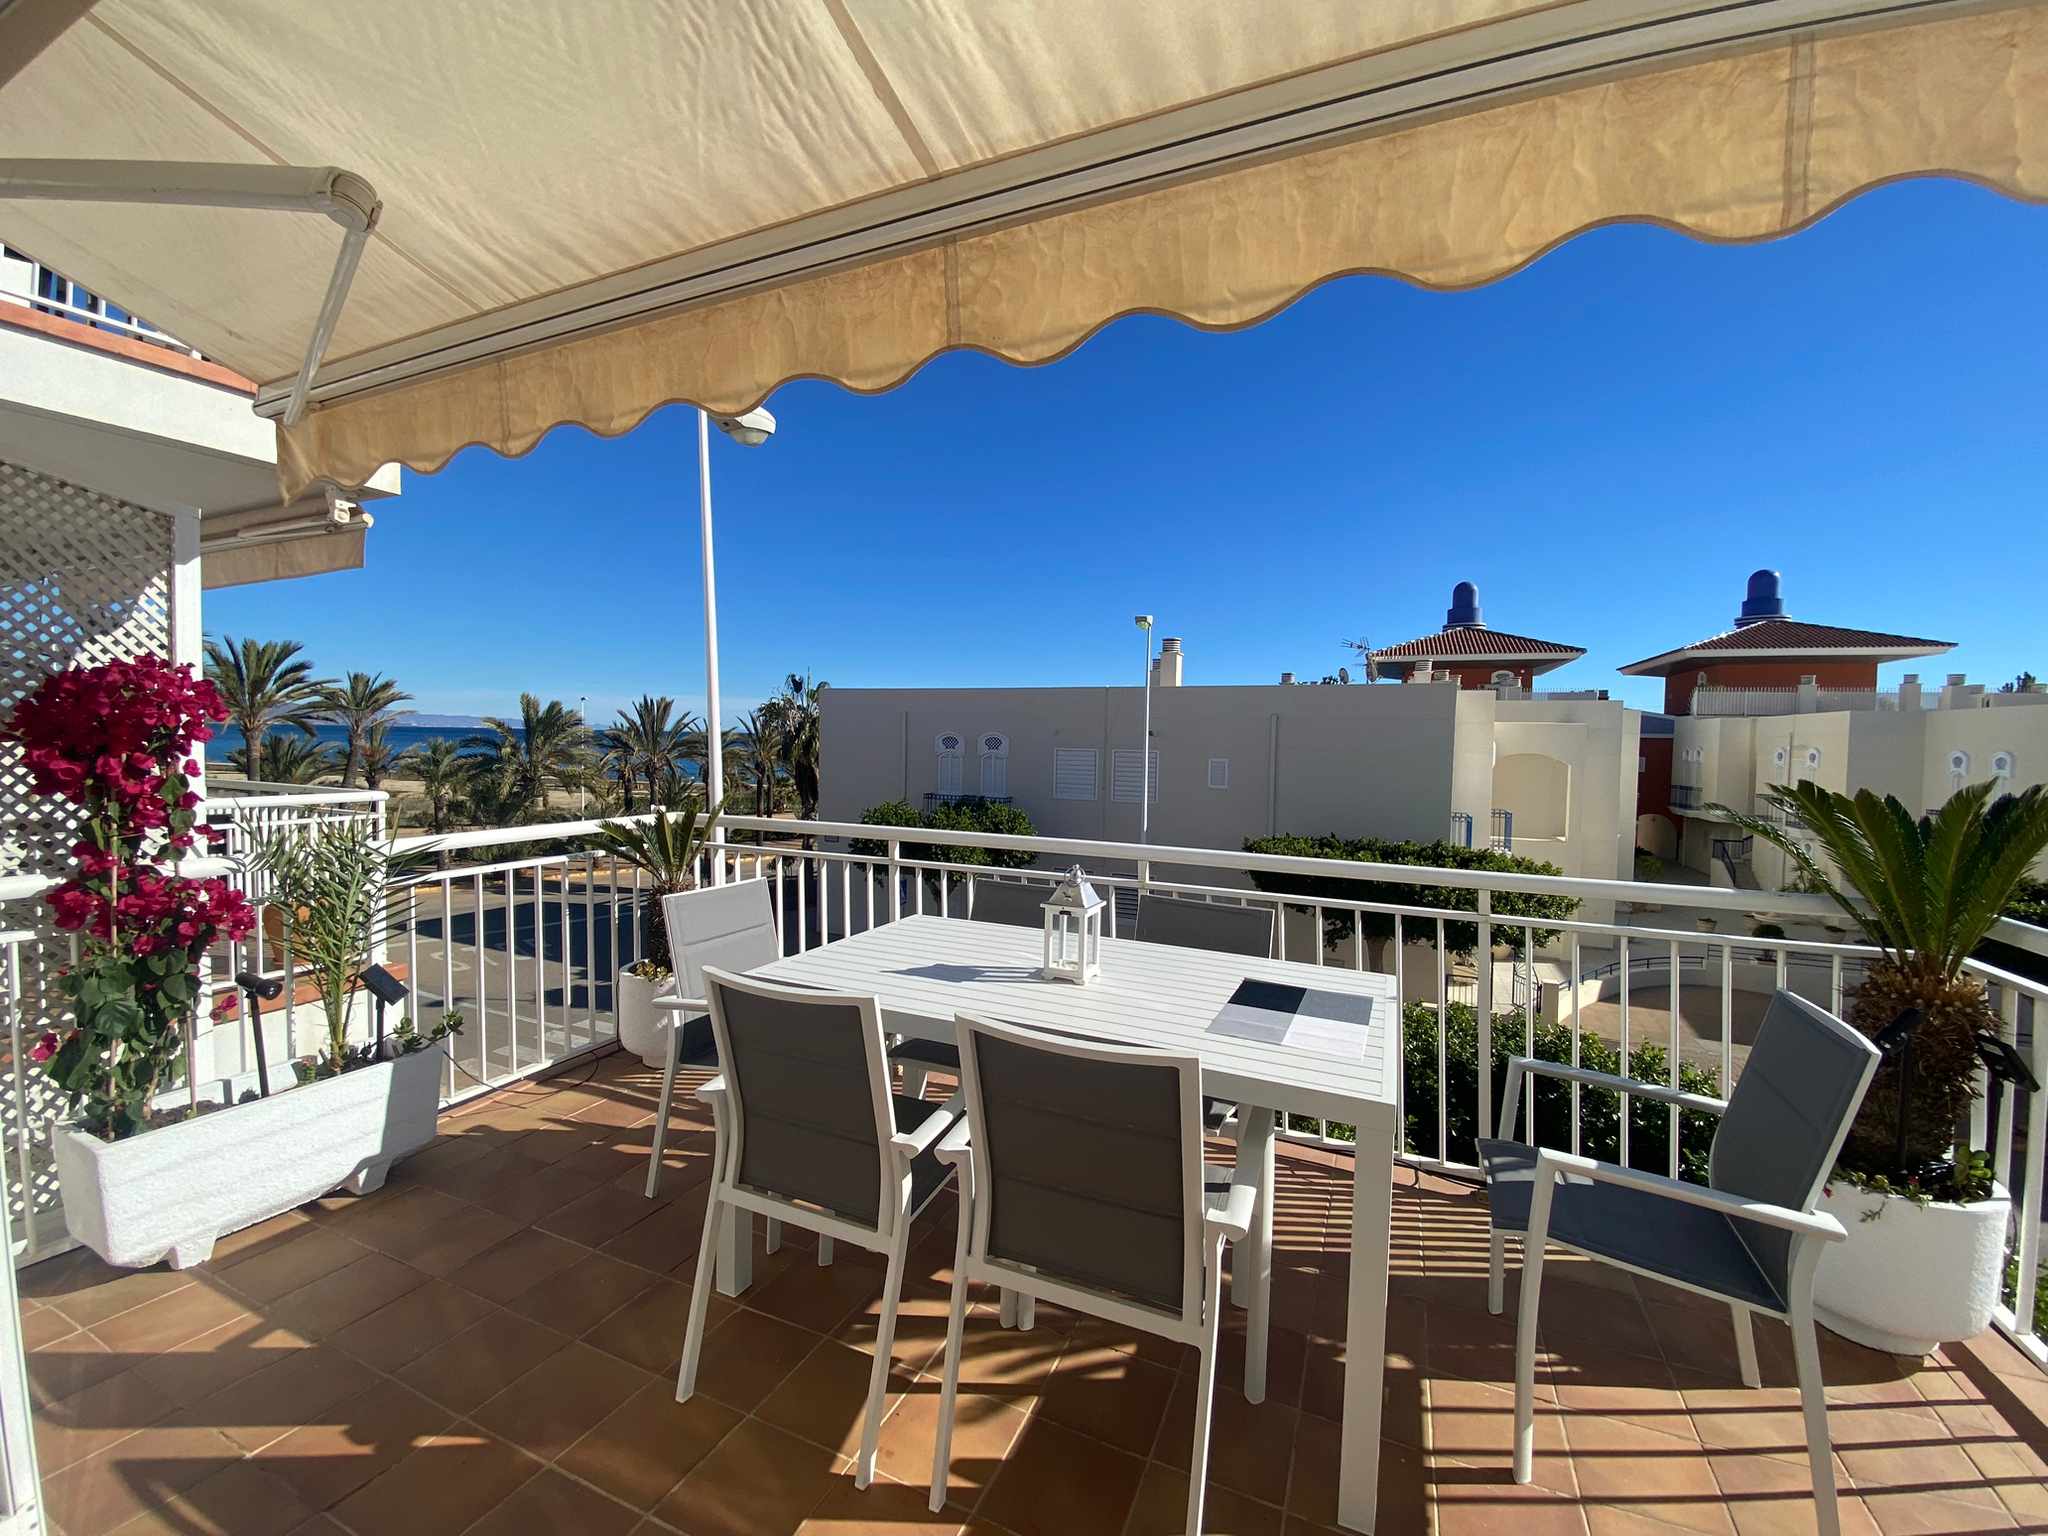 Spectacular apartment, cosy for a happy rest: Apartment for Rent in Mojácar, Almería